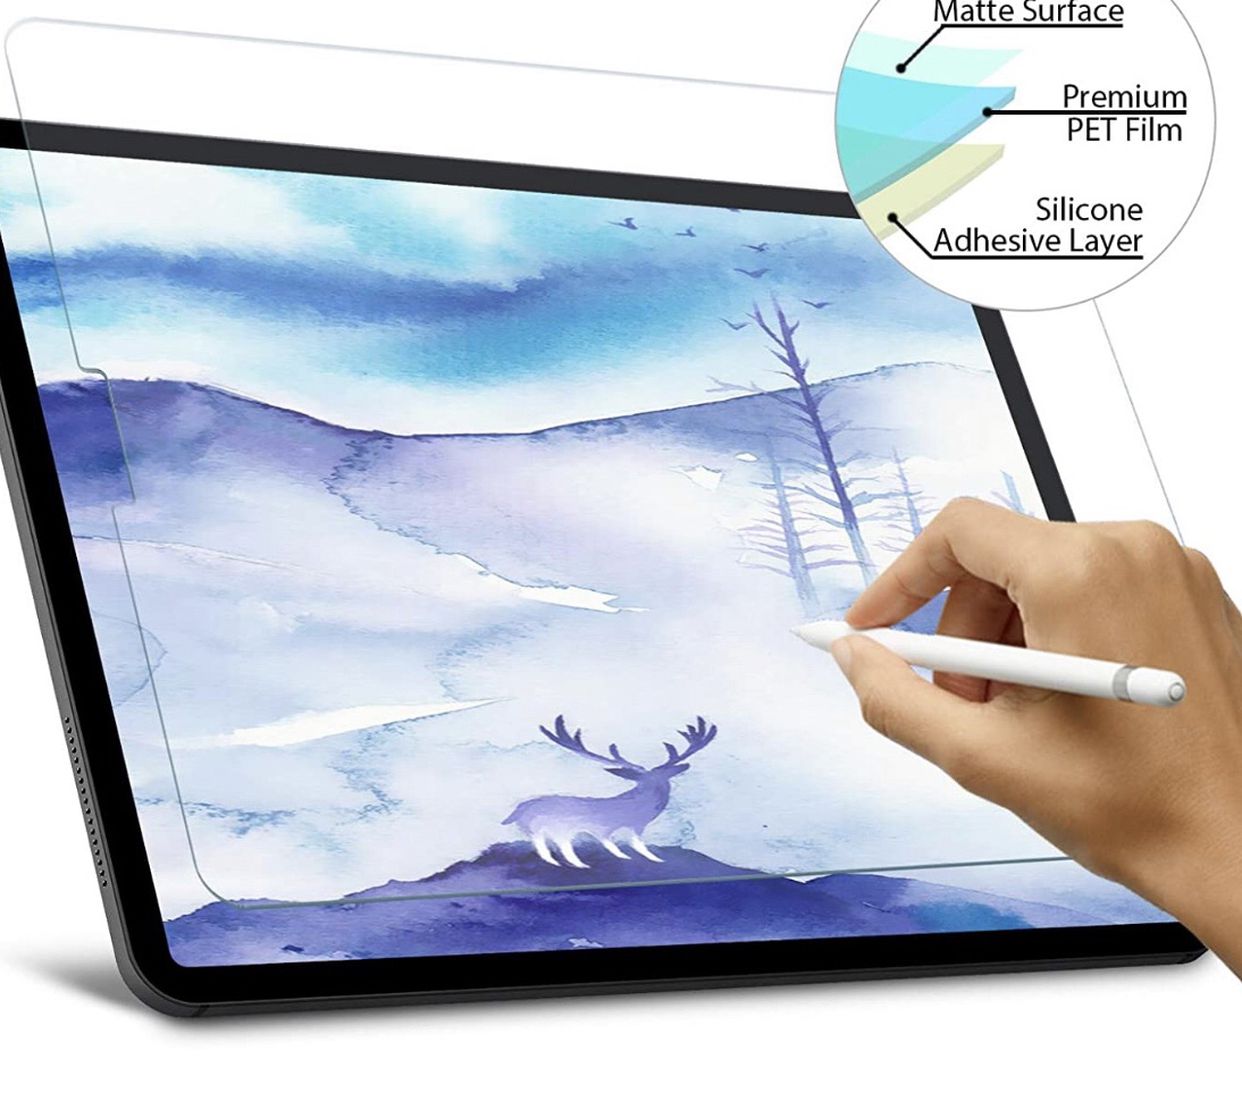 FOJOJO Paperfeel Screen Protector for iPad Pro 12.9, Matte PET Paperfeel Film with Face ID for iPad 12.9 (2018 Release), Compatible with Apple Pencil